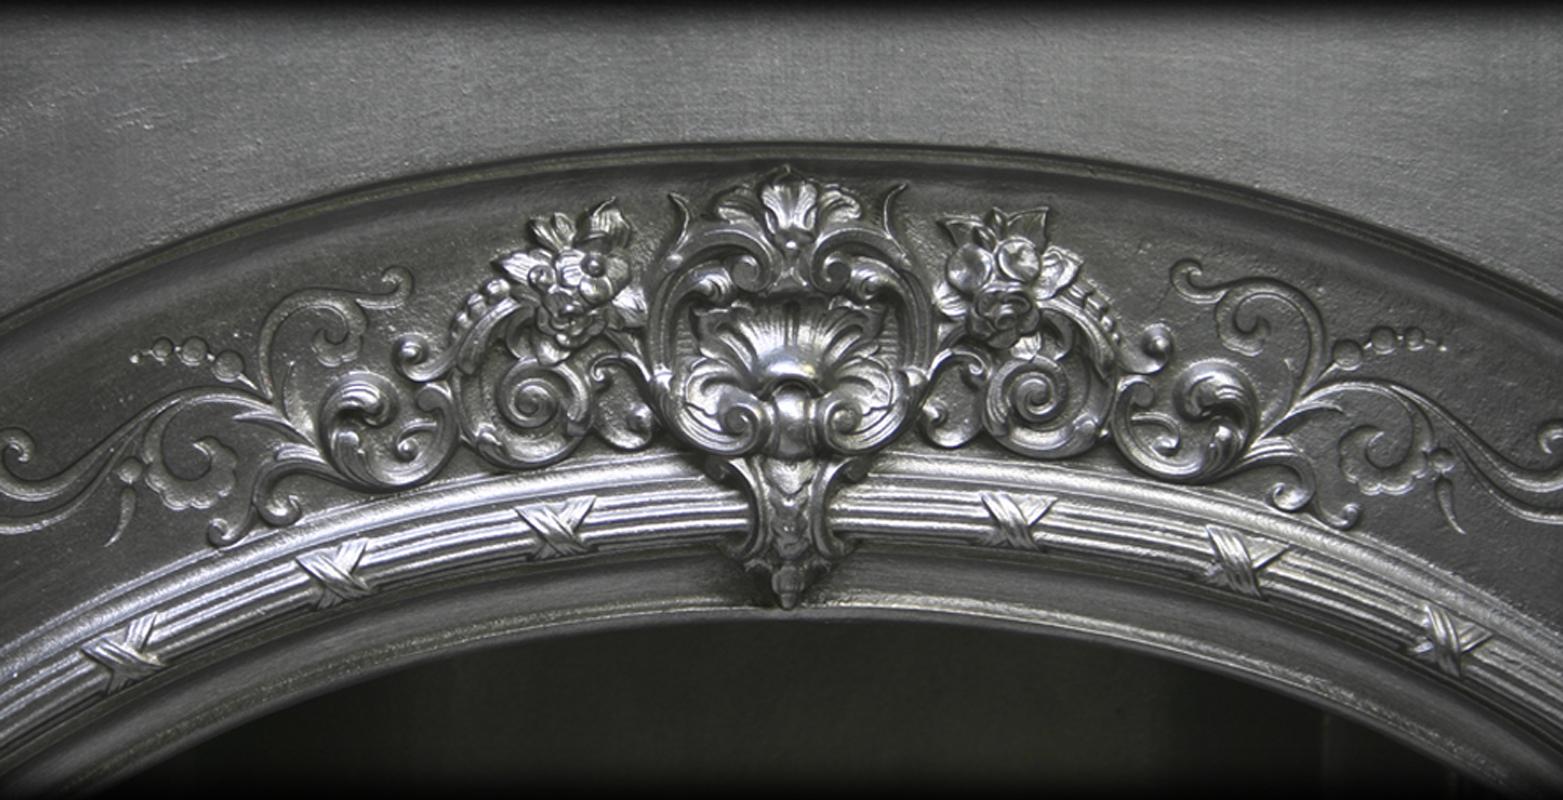 Antique Victorian ornate cast iron arched fireplace grate with blind fret detail to the spandrels, Fine central casting to the top of the arch and a nicely detailed curved cast iron fire back. The diamond registration mark dates this grate